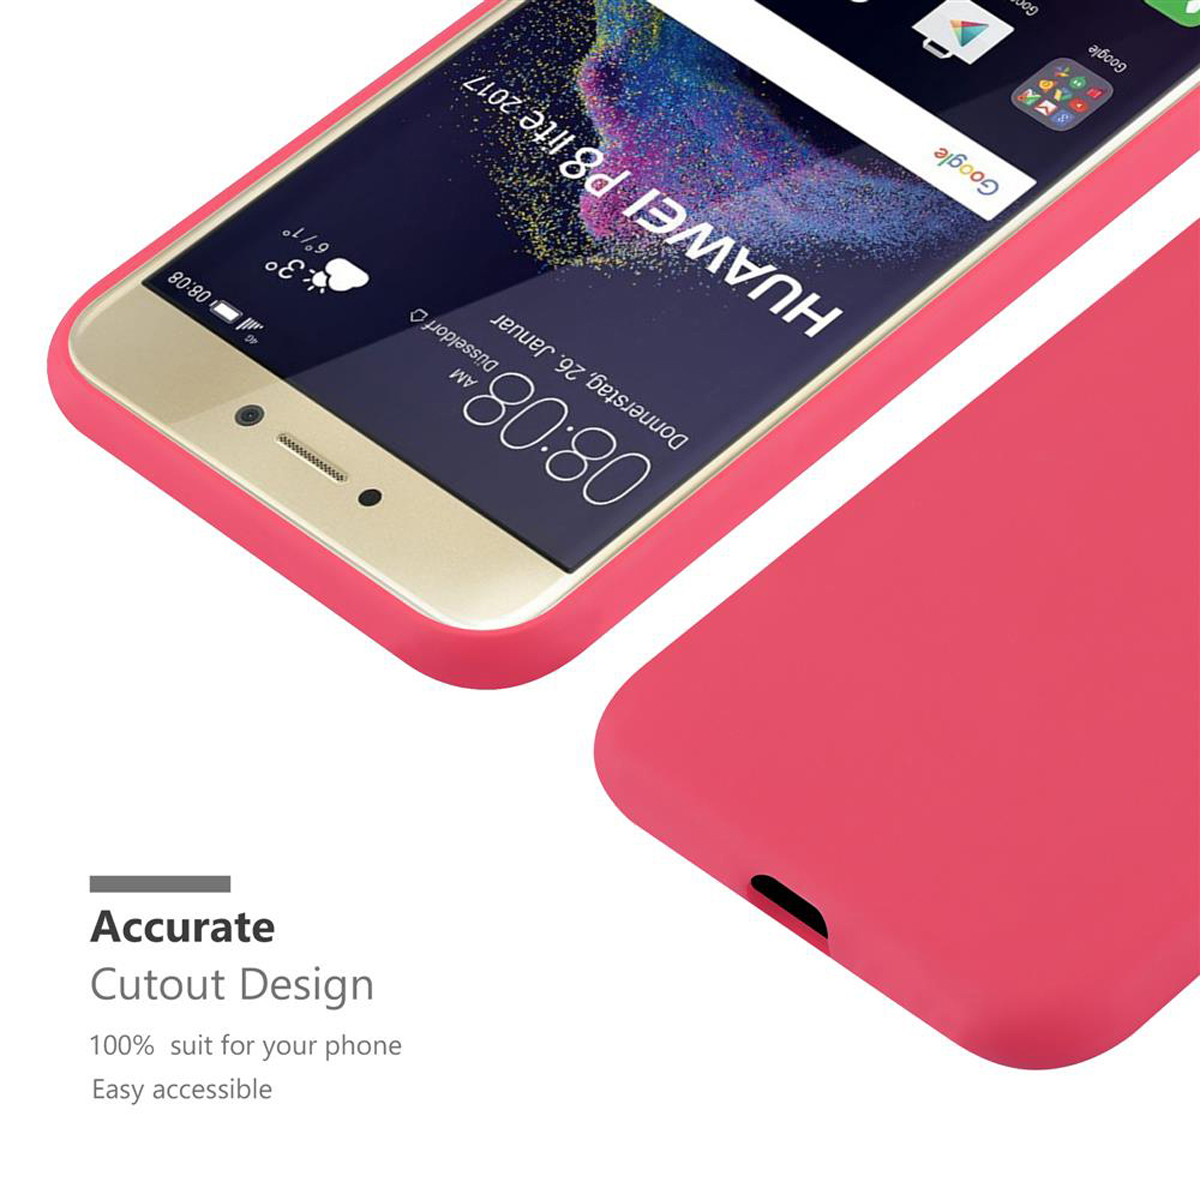 CADORABO Hülle im TPU P8 Huawei, Candy LITE ROT Style, Backcover, CANDY P9 2017 / LITE 2017